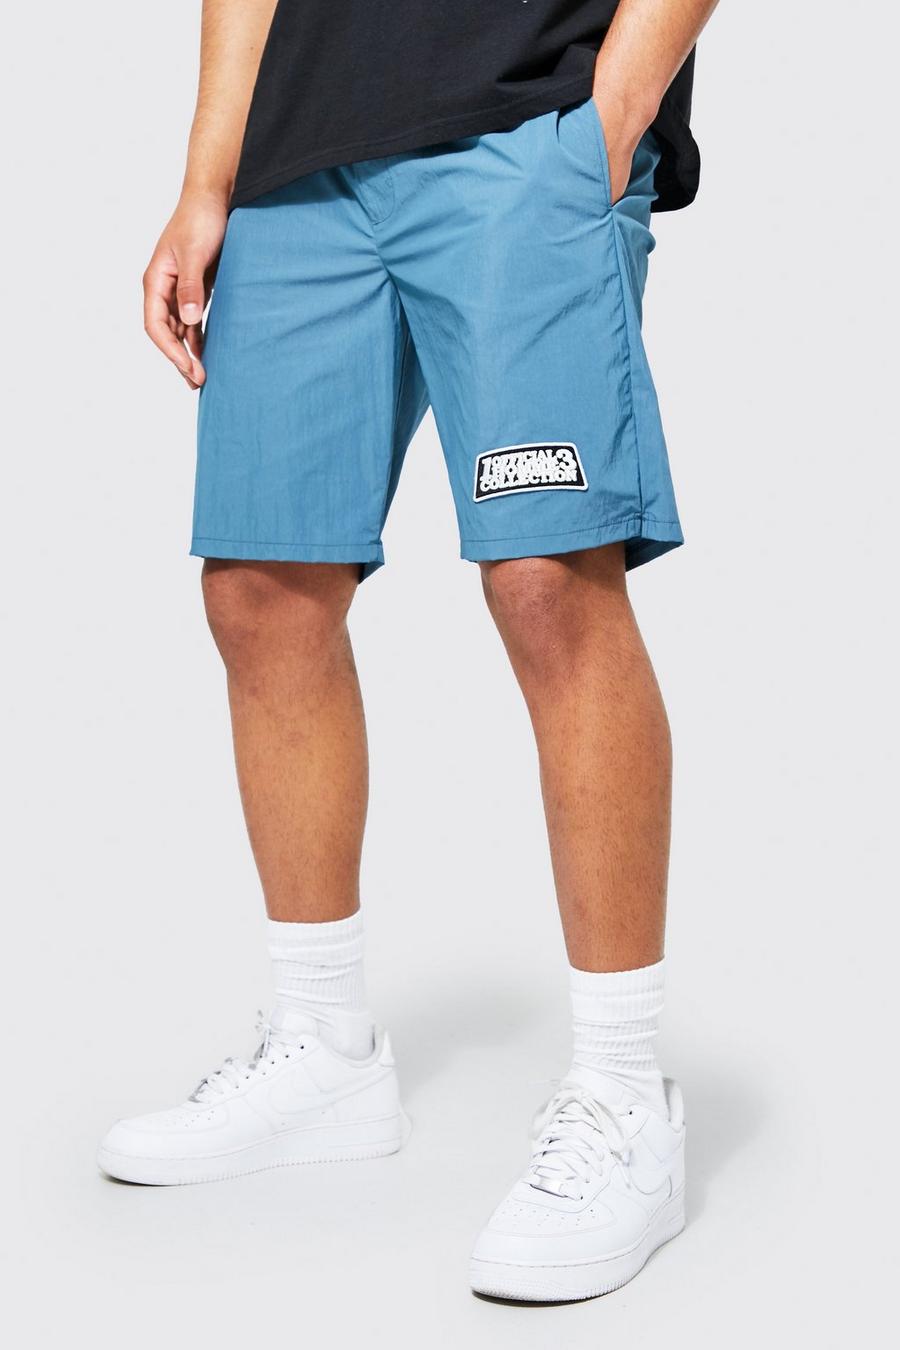 Pantaloncini Tall in Shell stile Varsity effetto velluto goffrato, Light blue image number 1